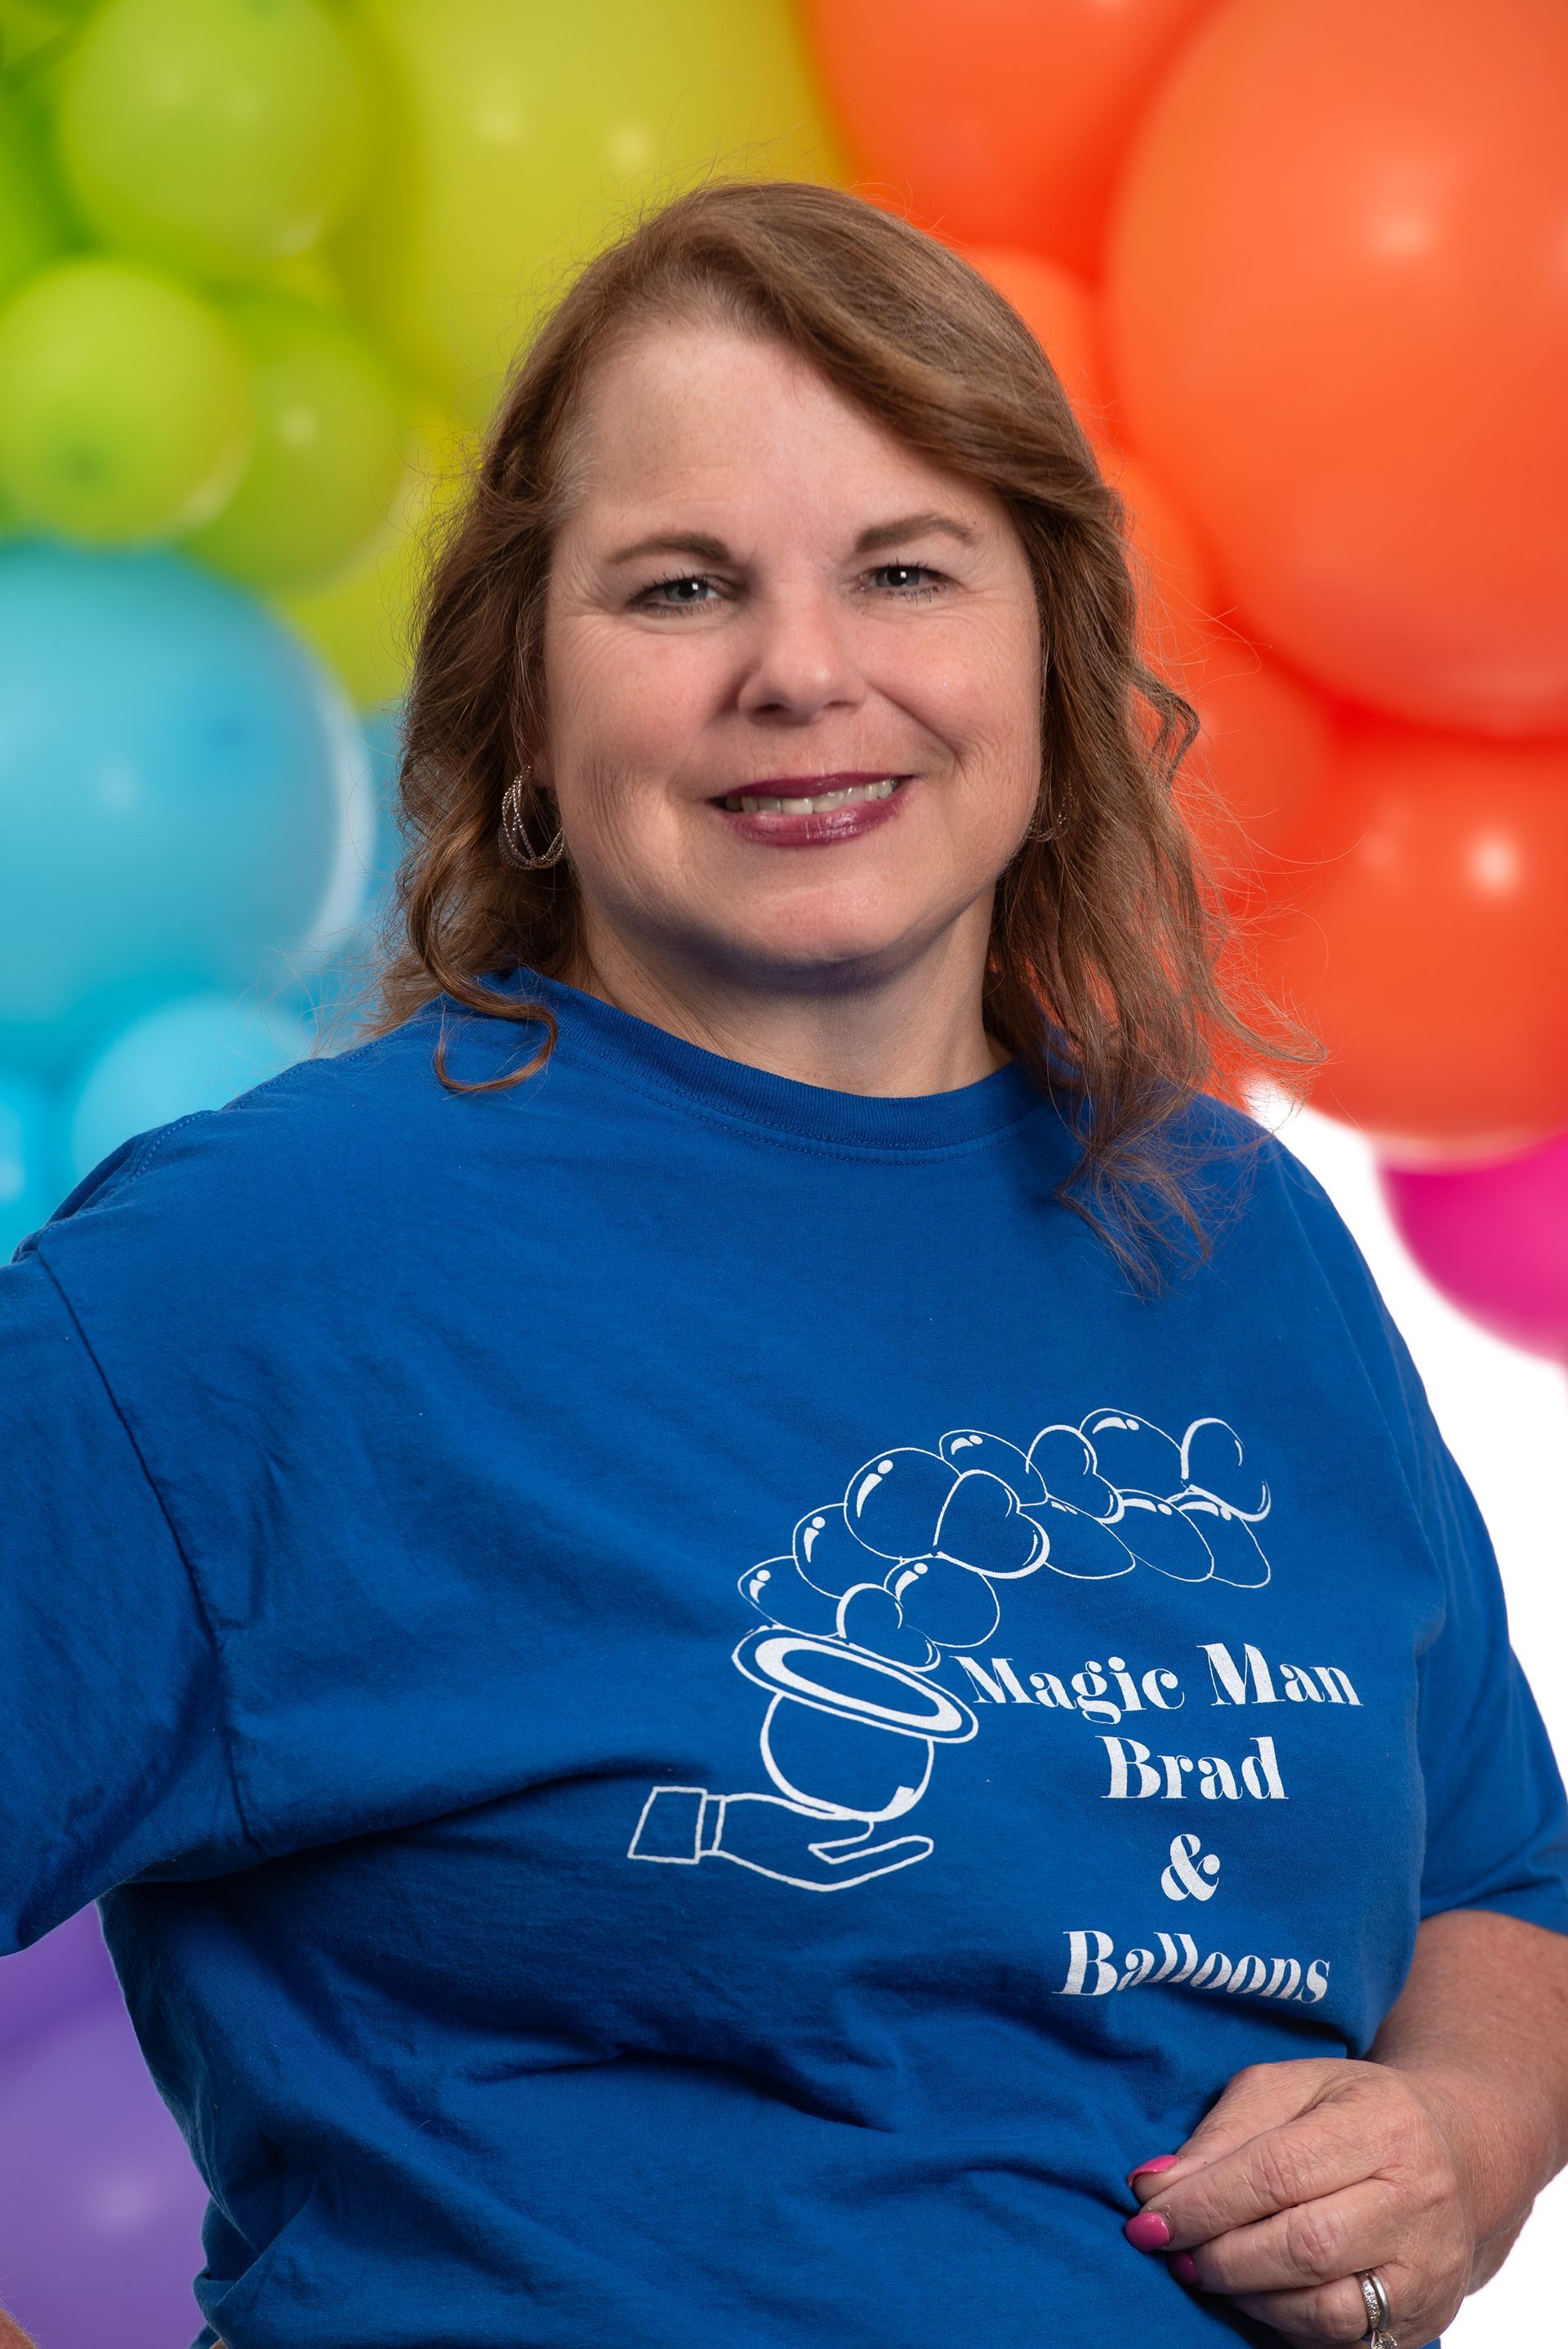 A woman in a blue shirt is standing in front of balloons.